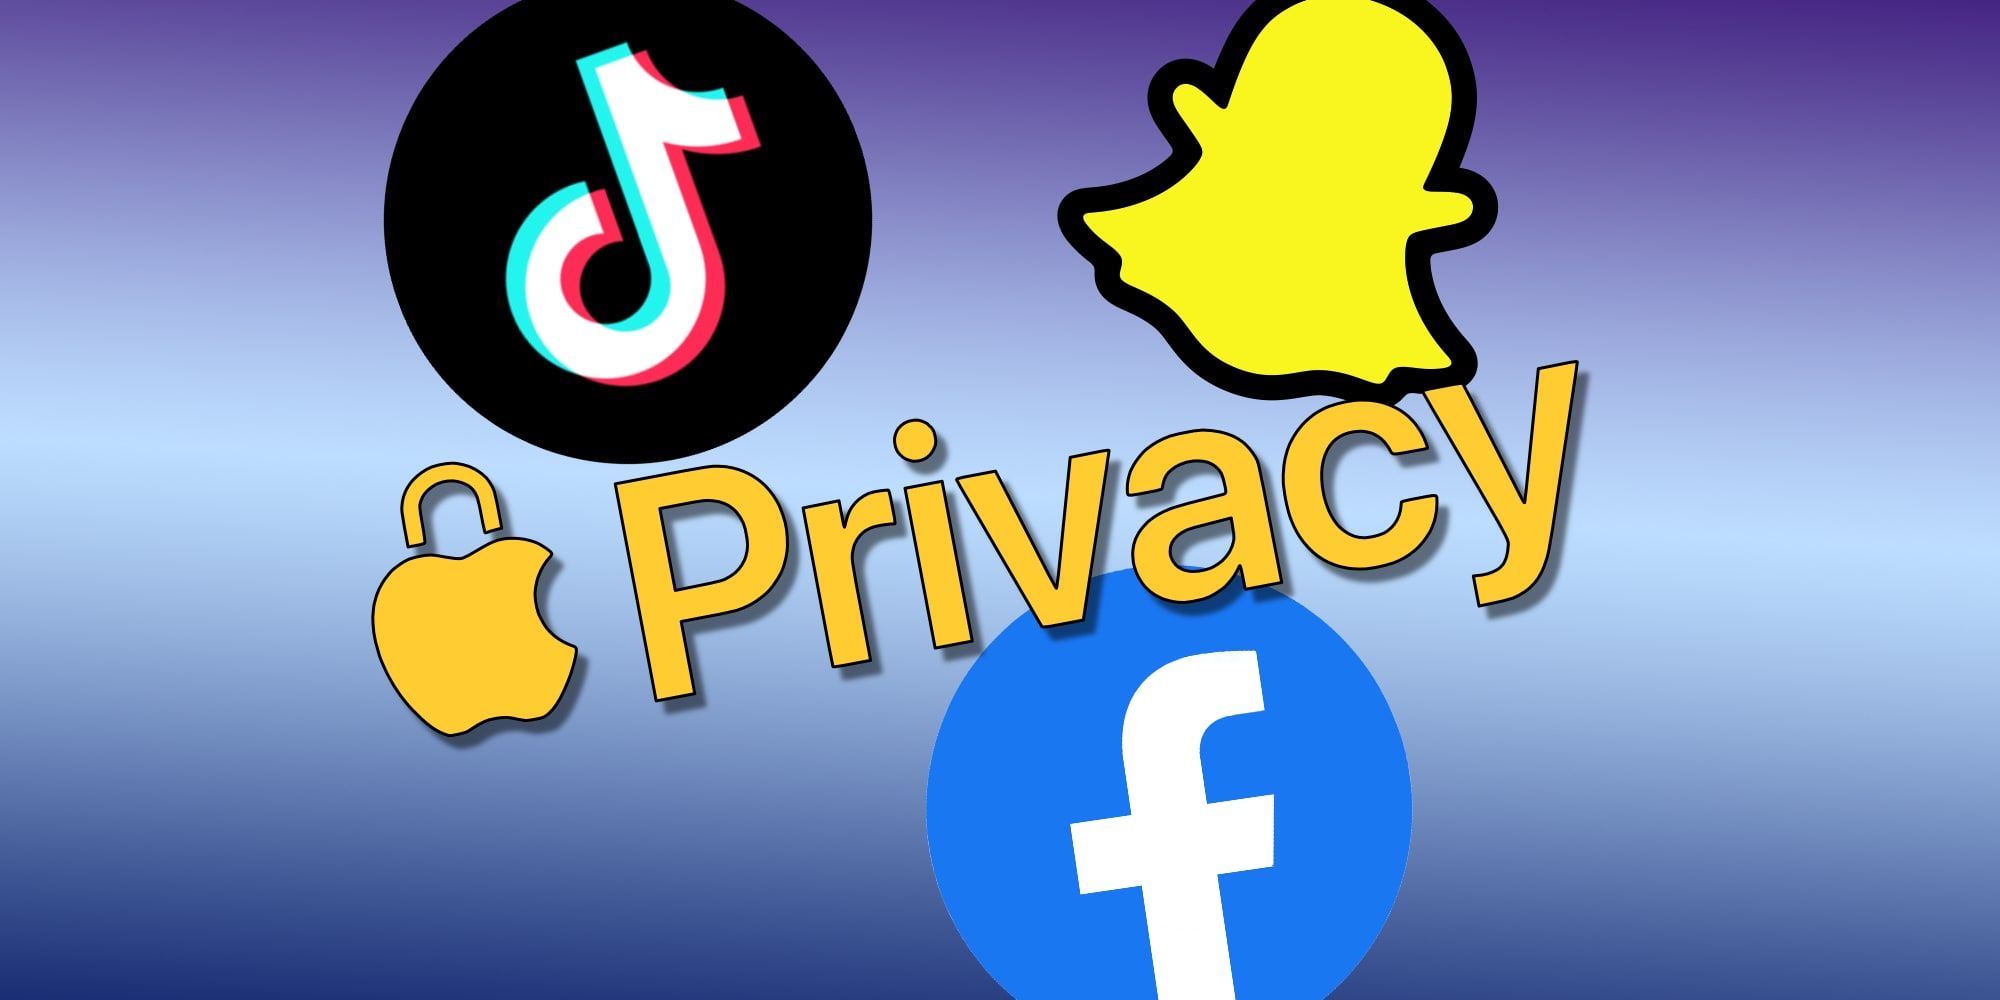 App Store Privacy Labels How To Check What Data An iPhone App Collects